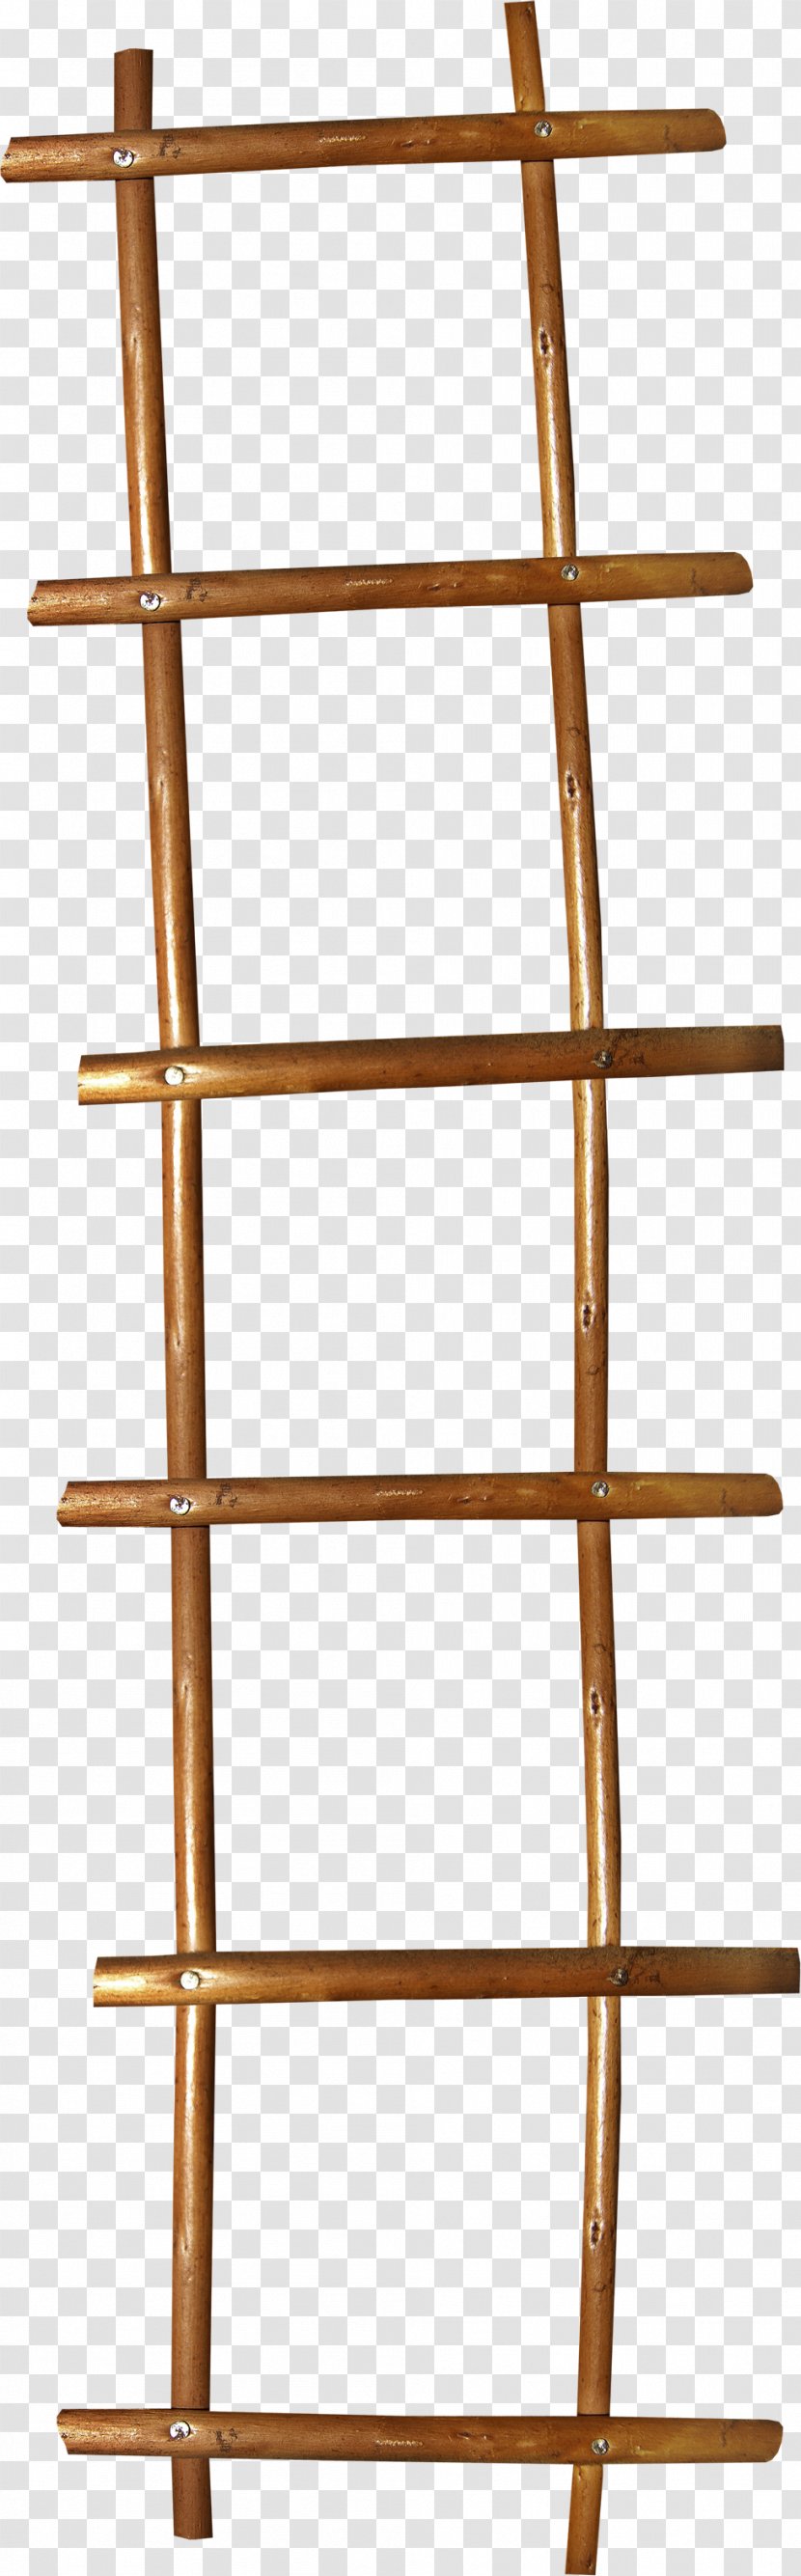 Ladder Wood Stairs Rope - Pretty Brown Wooden Transparent PNG